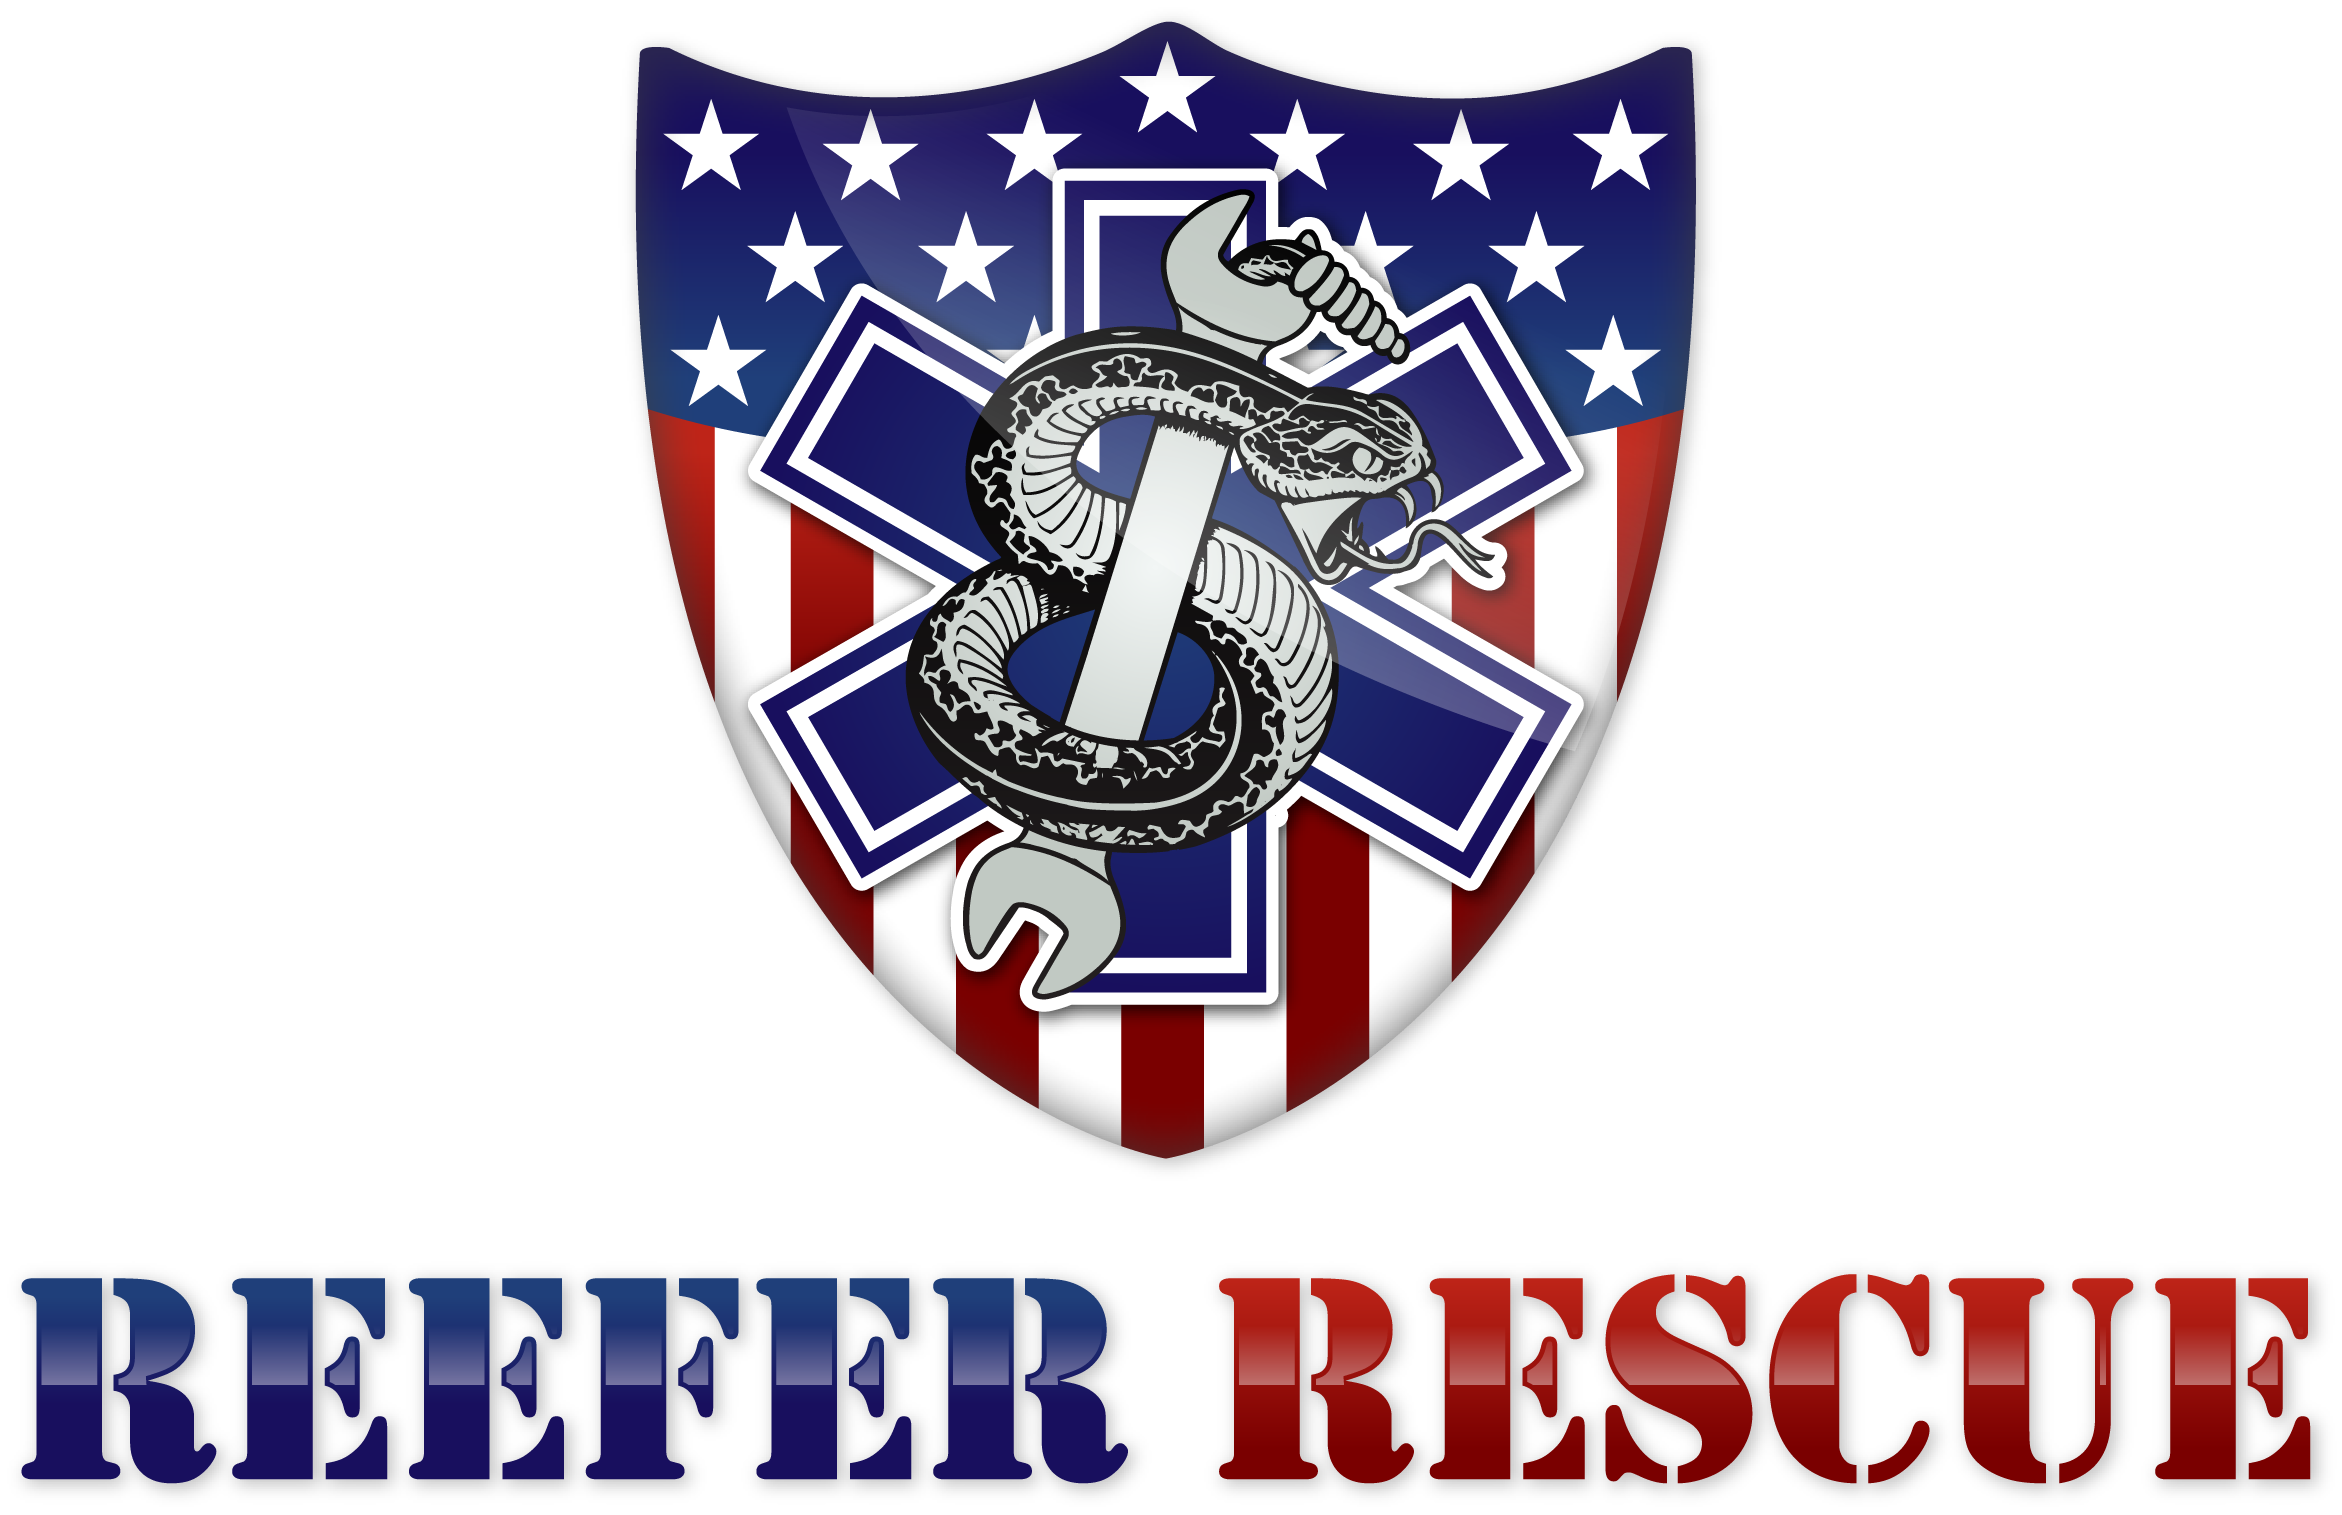 Reefer Rescue